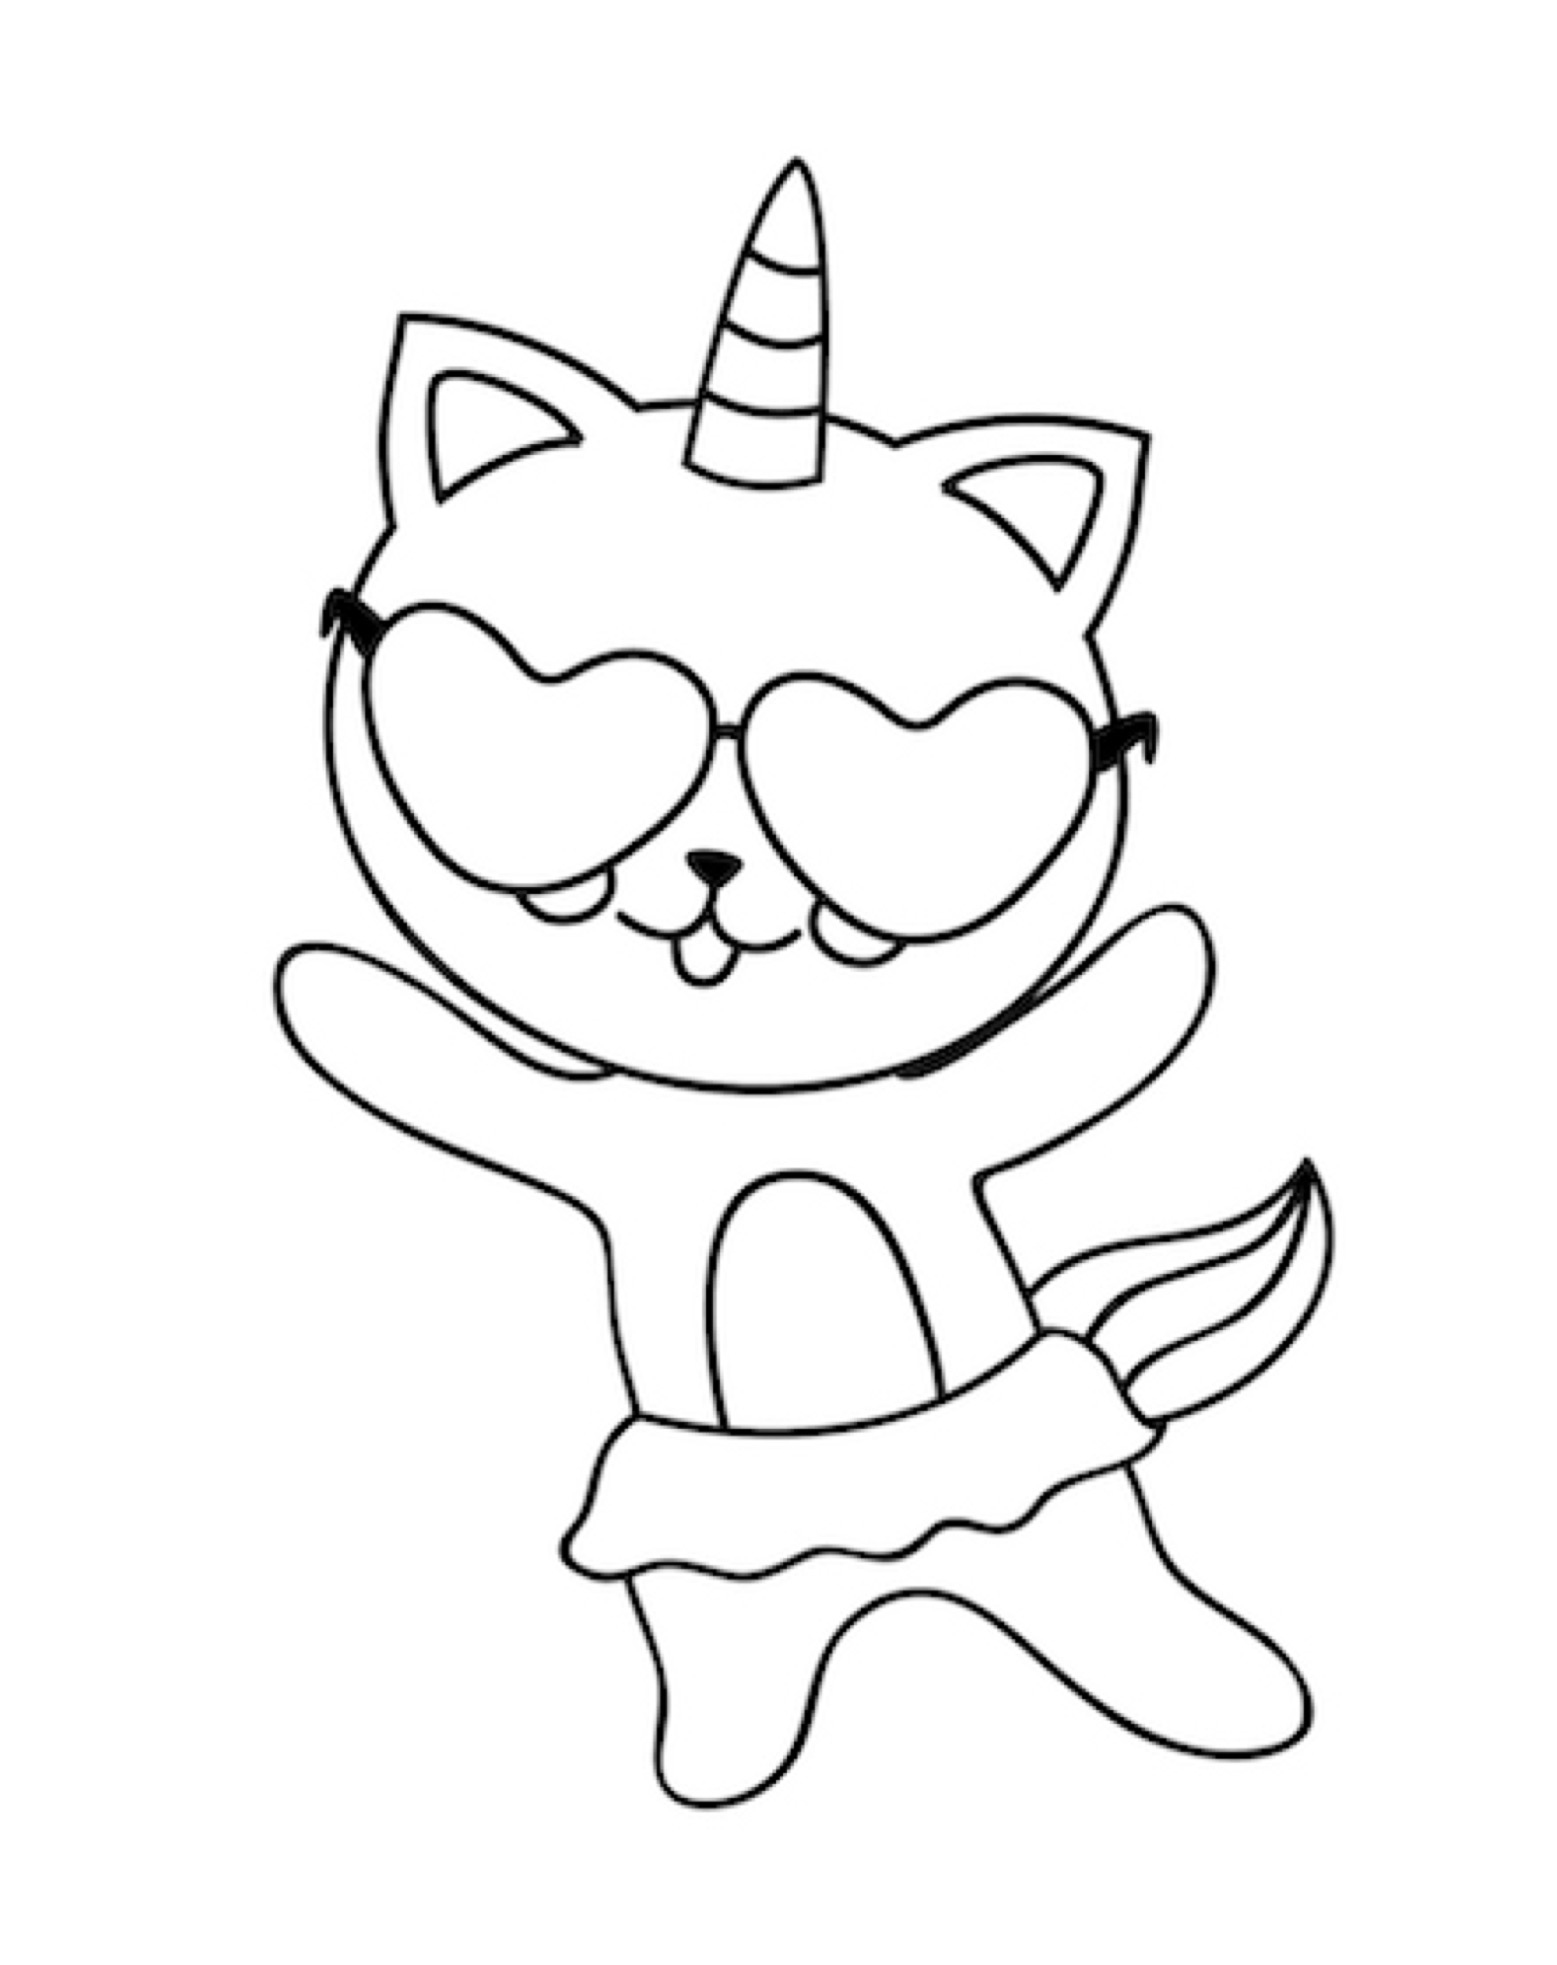 unicorn-kitty-coloring-page-printable-dancing-unicorn-cat-coloring-pages-waldo-harvey